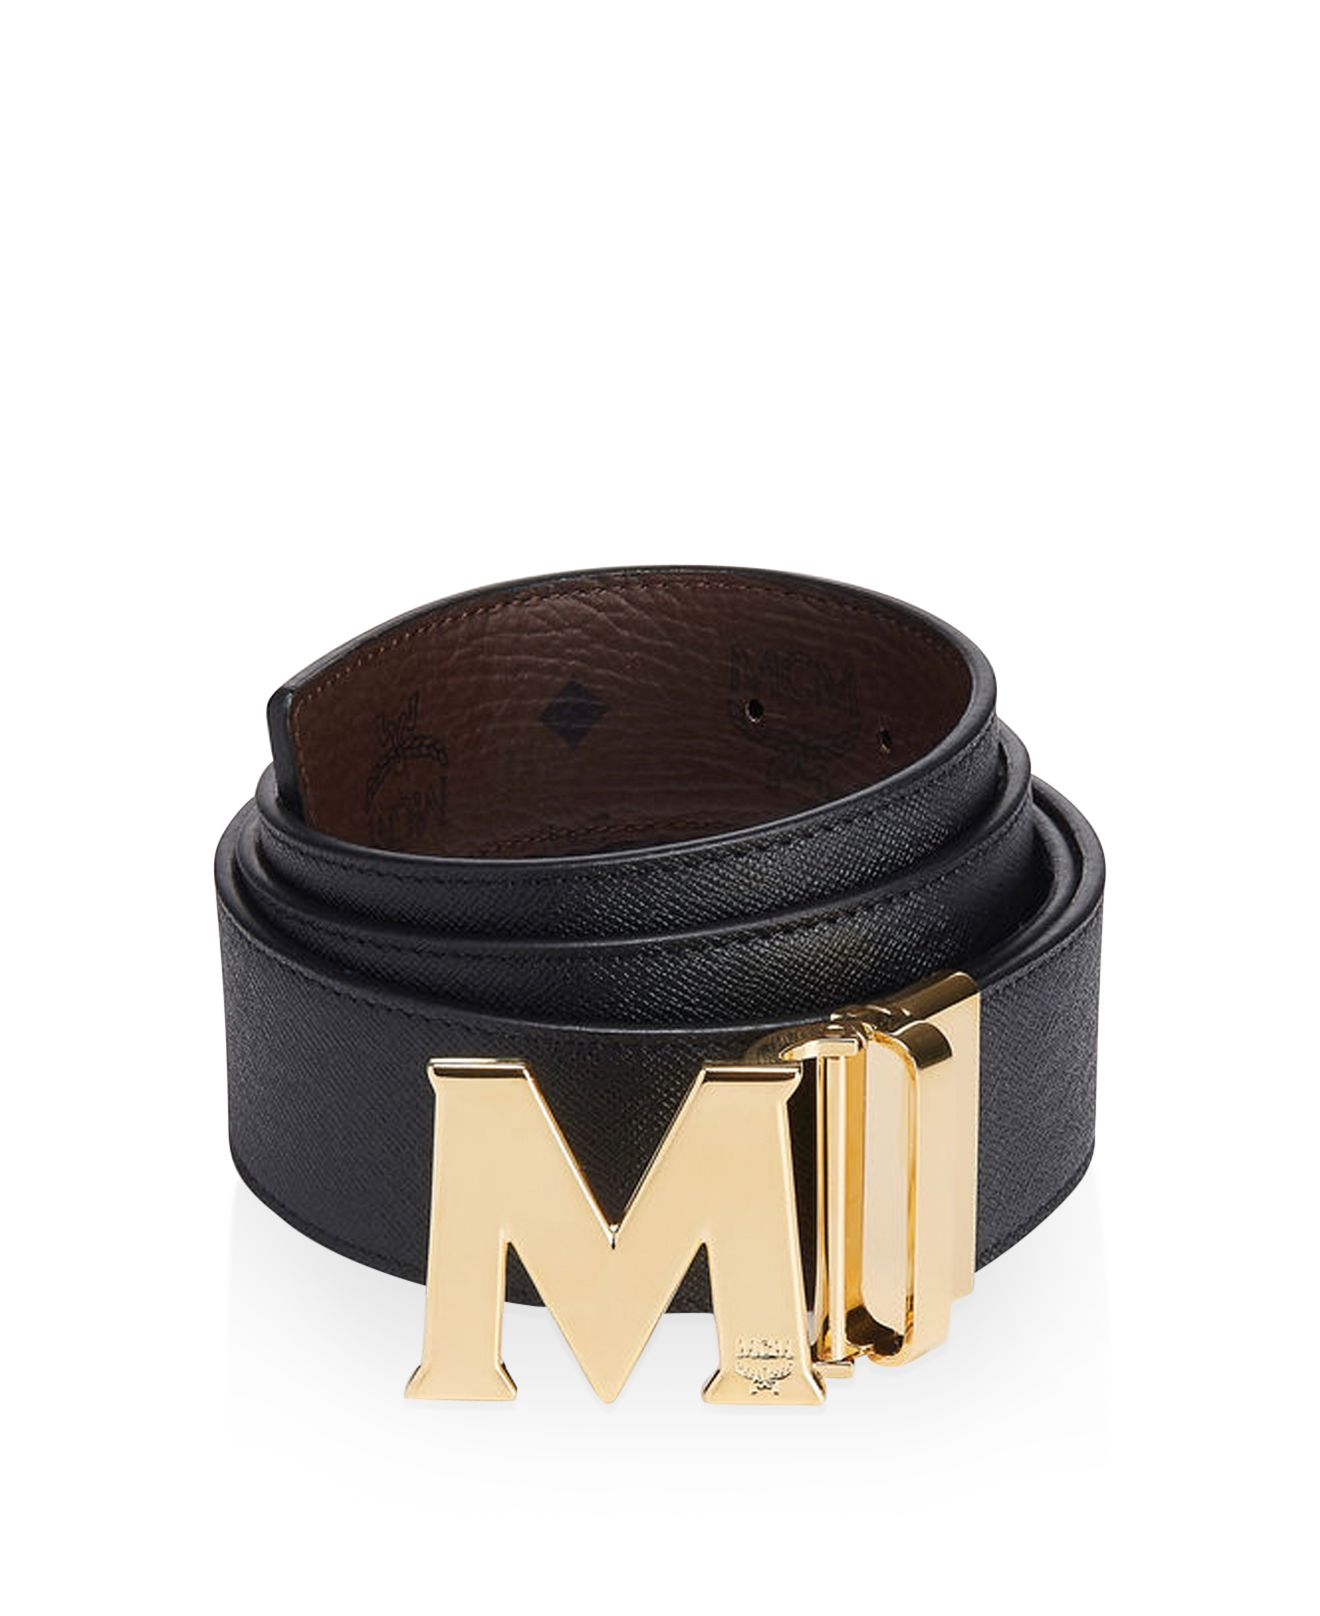 Mcm Claus Reversible Belt in Multicolor for Men (Chocolate) | Lyst